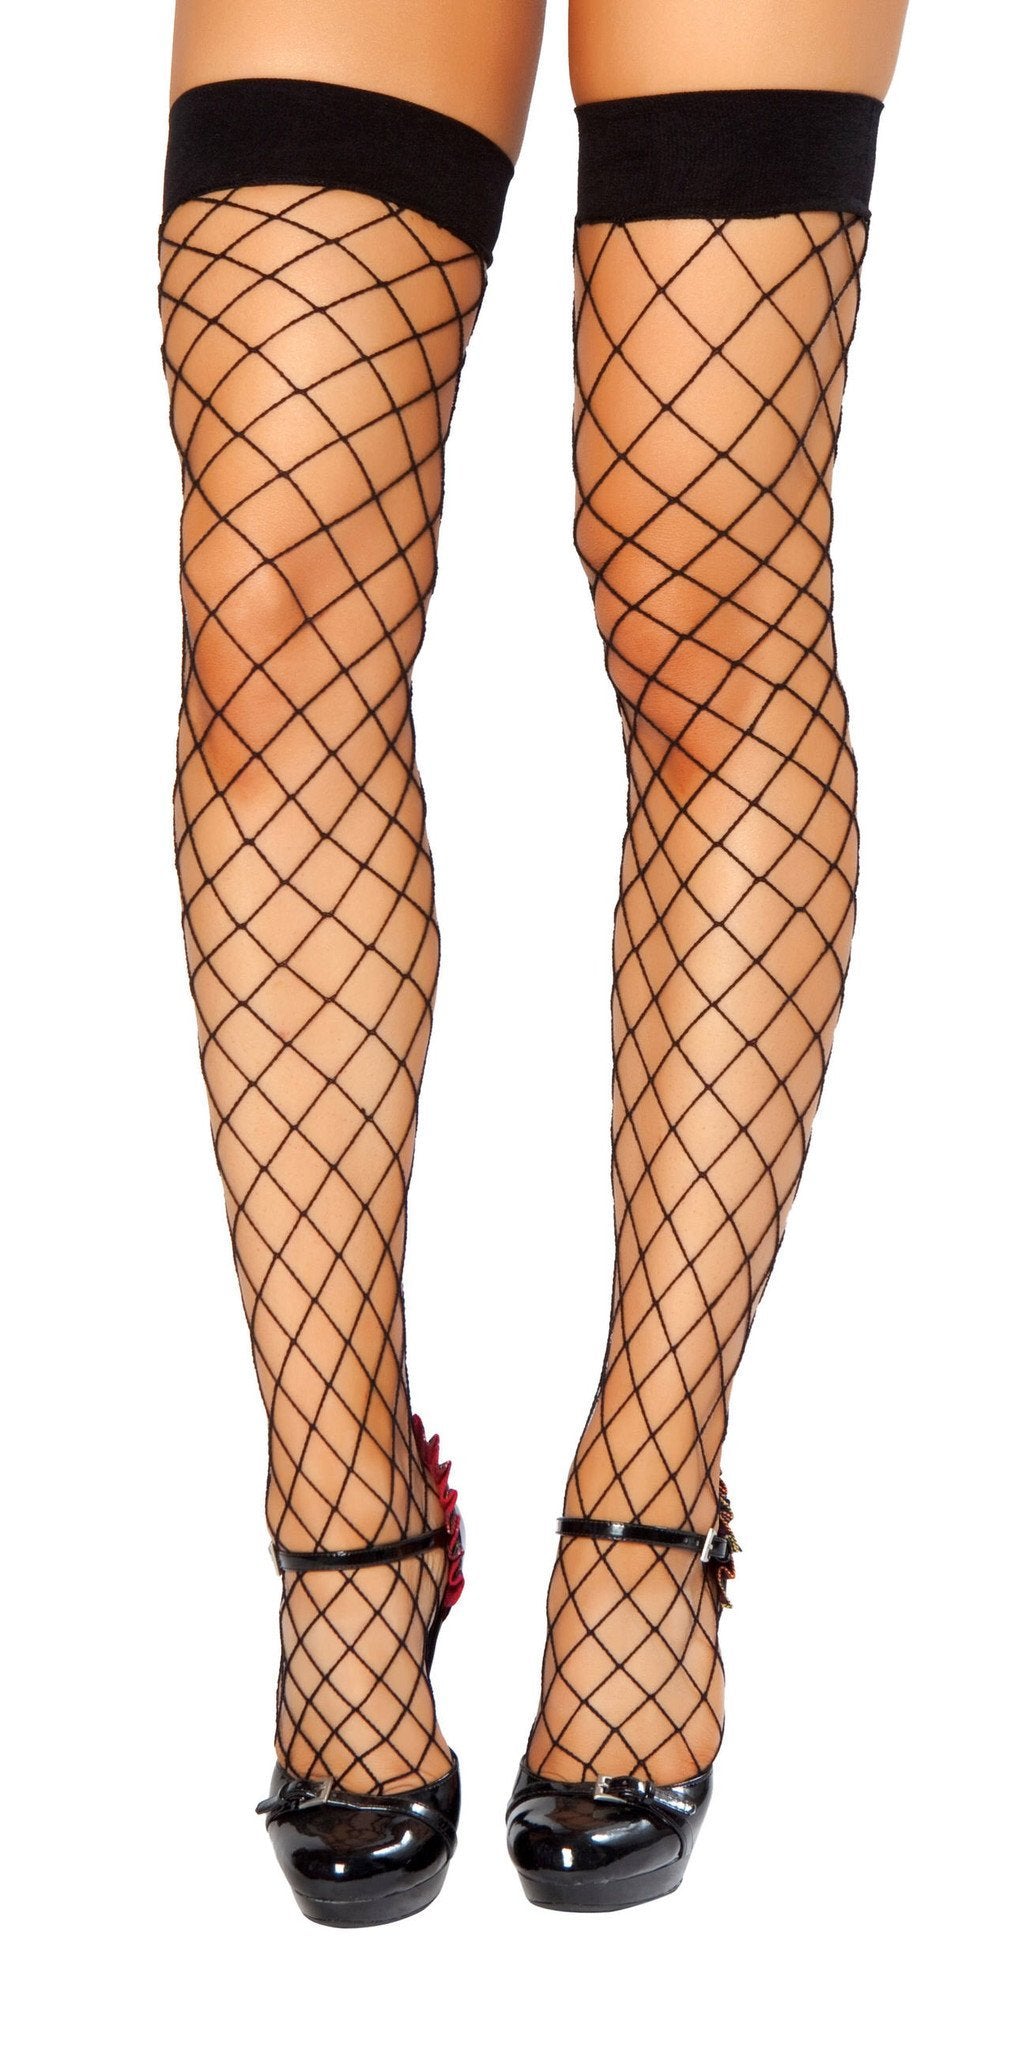 Buy Thigh High Fishnet Stockings from RomaRetailShop for 3.99 with Same Day Shipping Designed by Roma Costume STC207-Blk-O/S